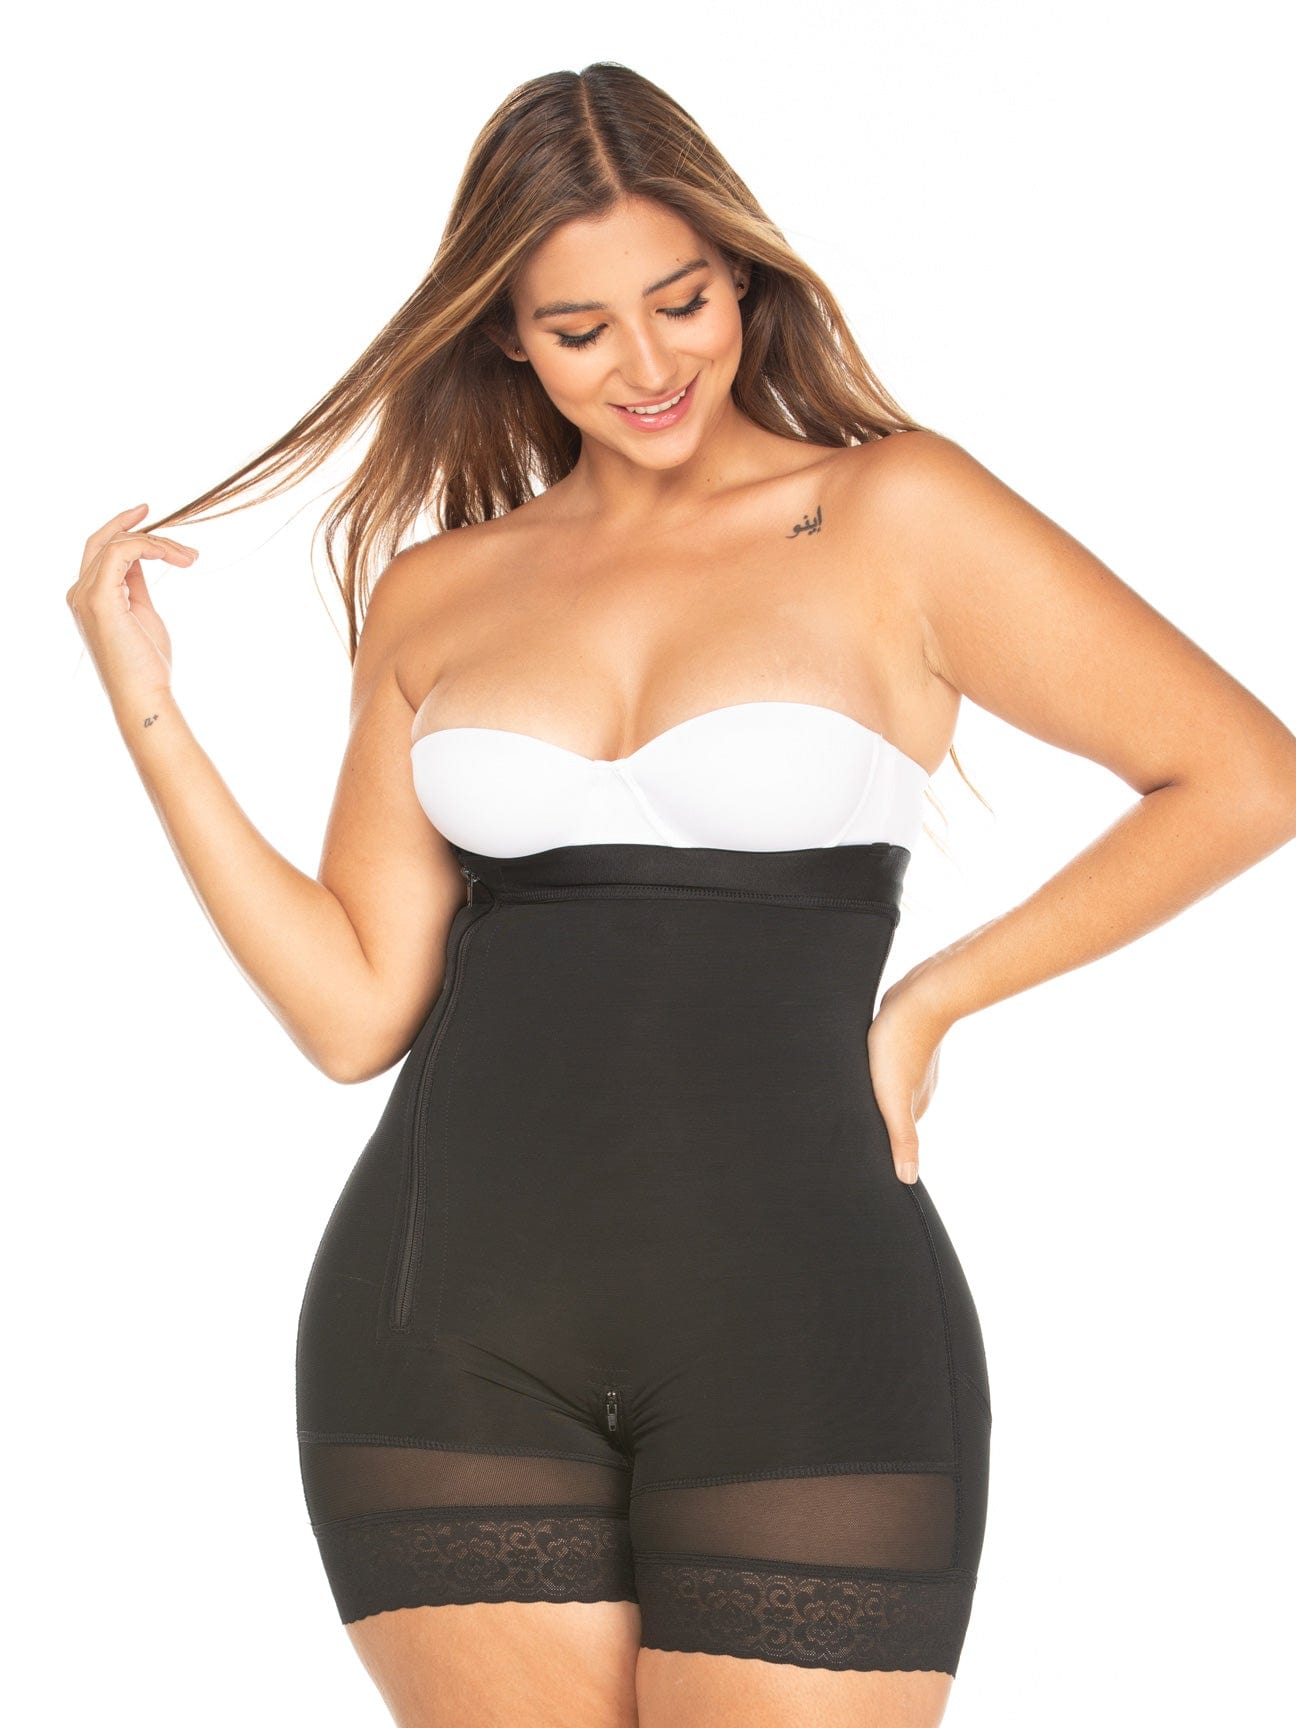 Colombian Womens Seamless Pregnancy Fajas Body Shapers With Tummy Control  And Underbust Support Plus Size S 6XL From Elroyelissa, $21.26